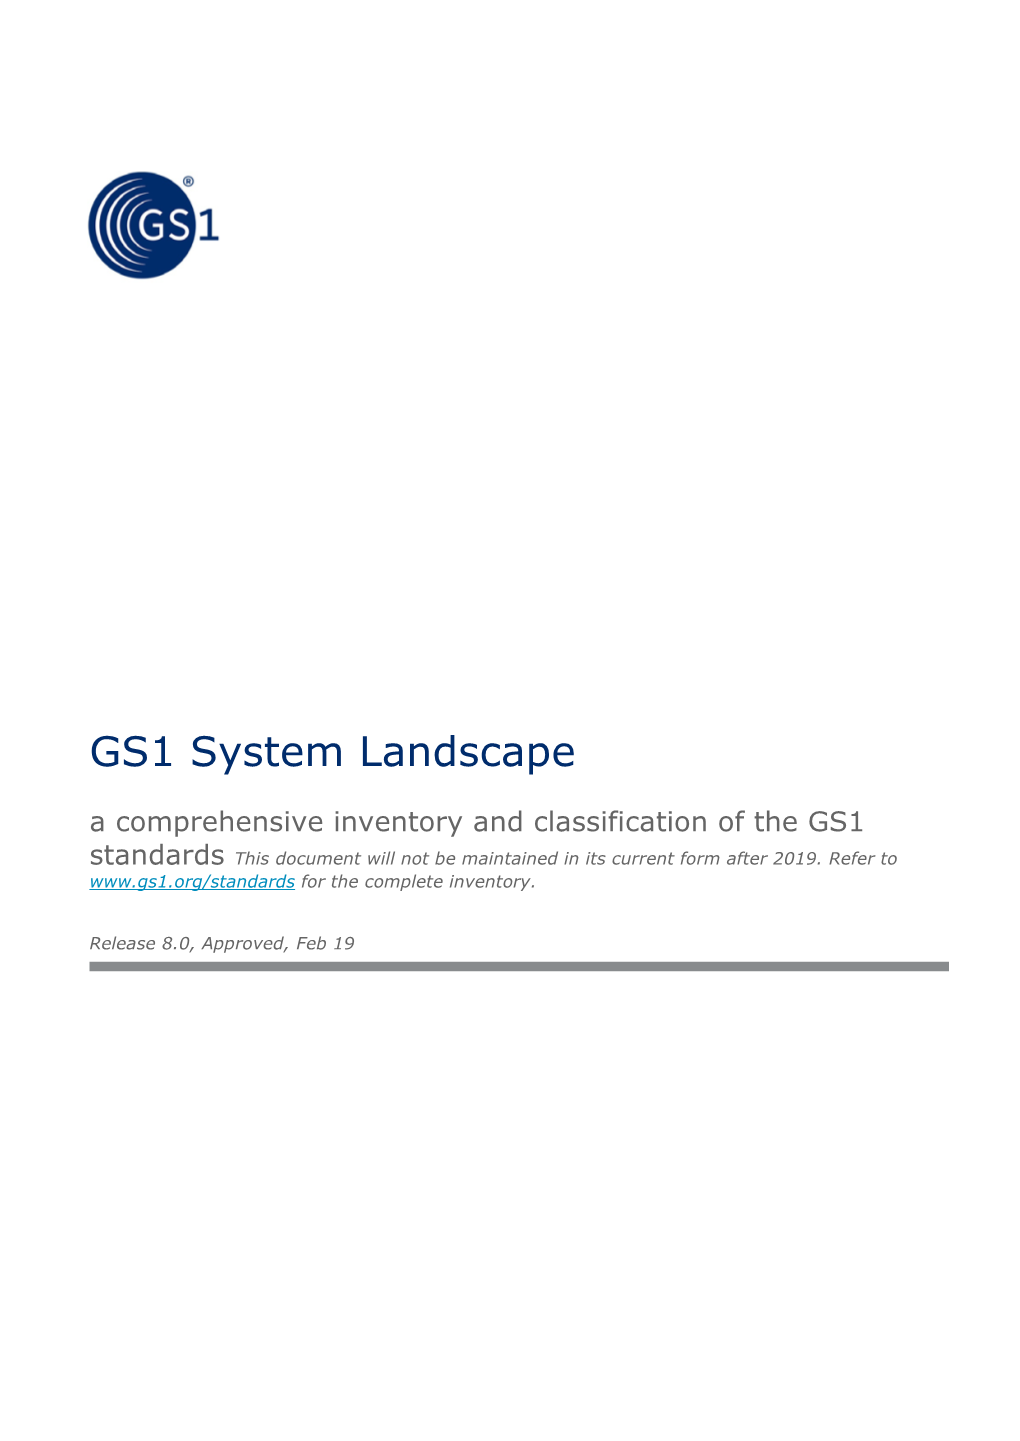 GS1 System Landscape a Comprehensive Inventory and Classification of the GS1 Standards This Document Will Not Be Maintained in Its Current Form After 2019